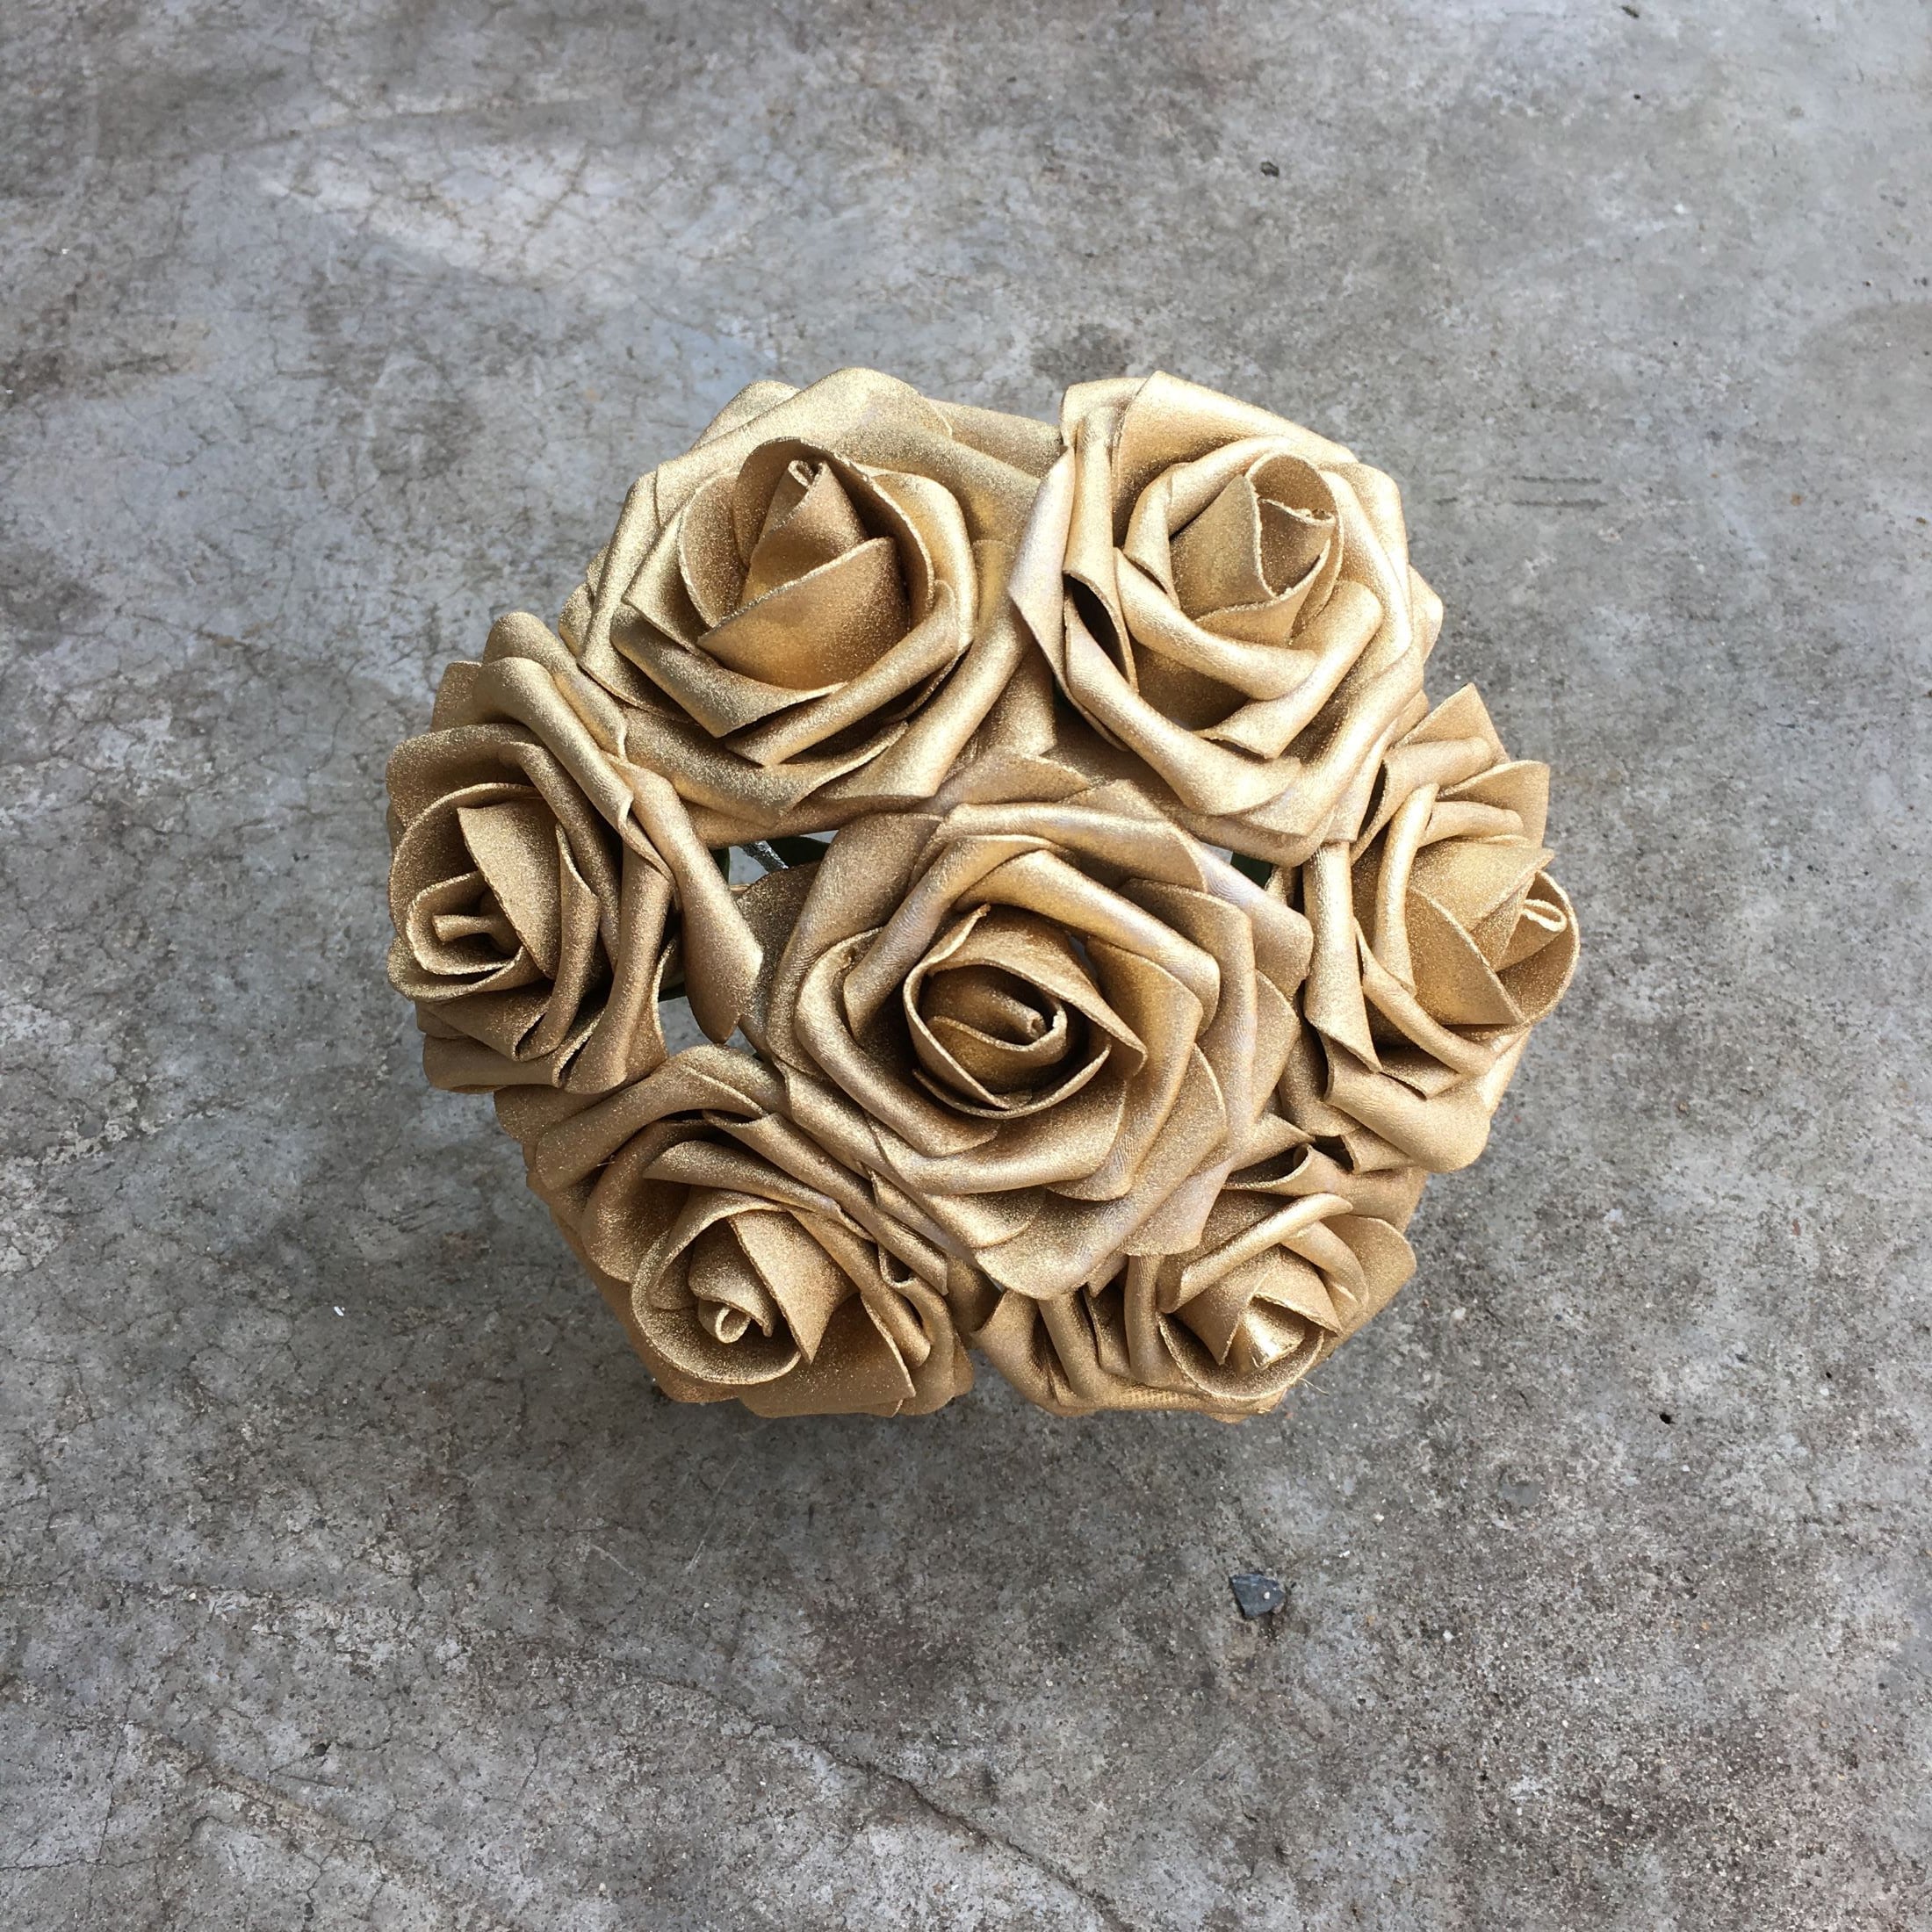 Details about   Artificial Foam Roses Wedding Flowers Party Prom Gold Or Silver Bride Bouquet 